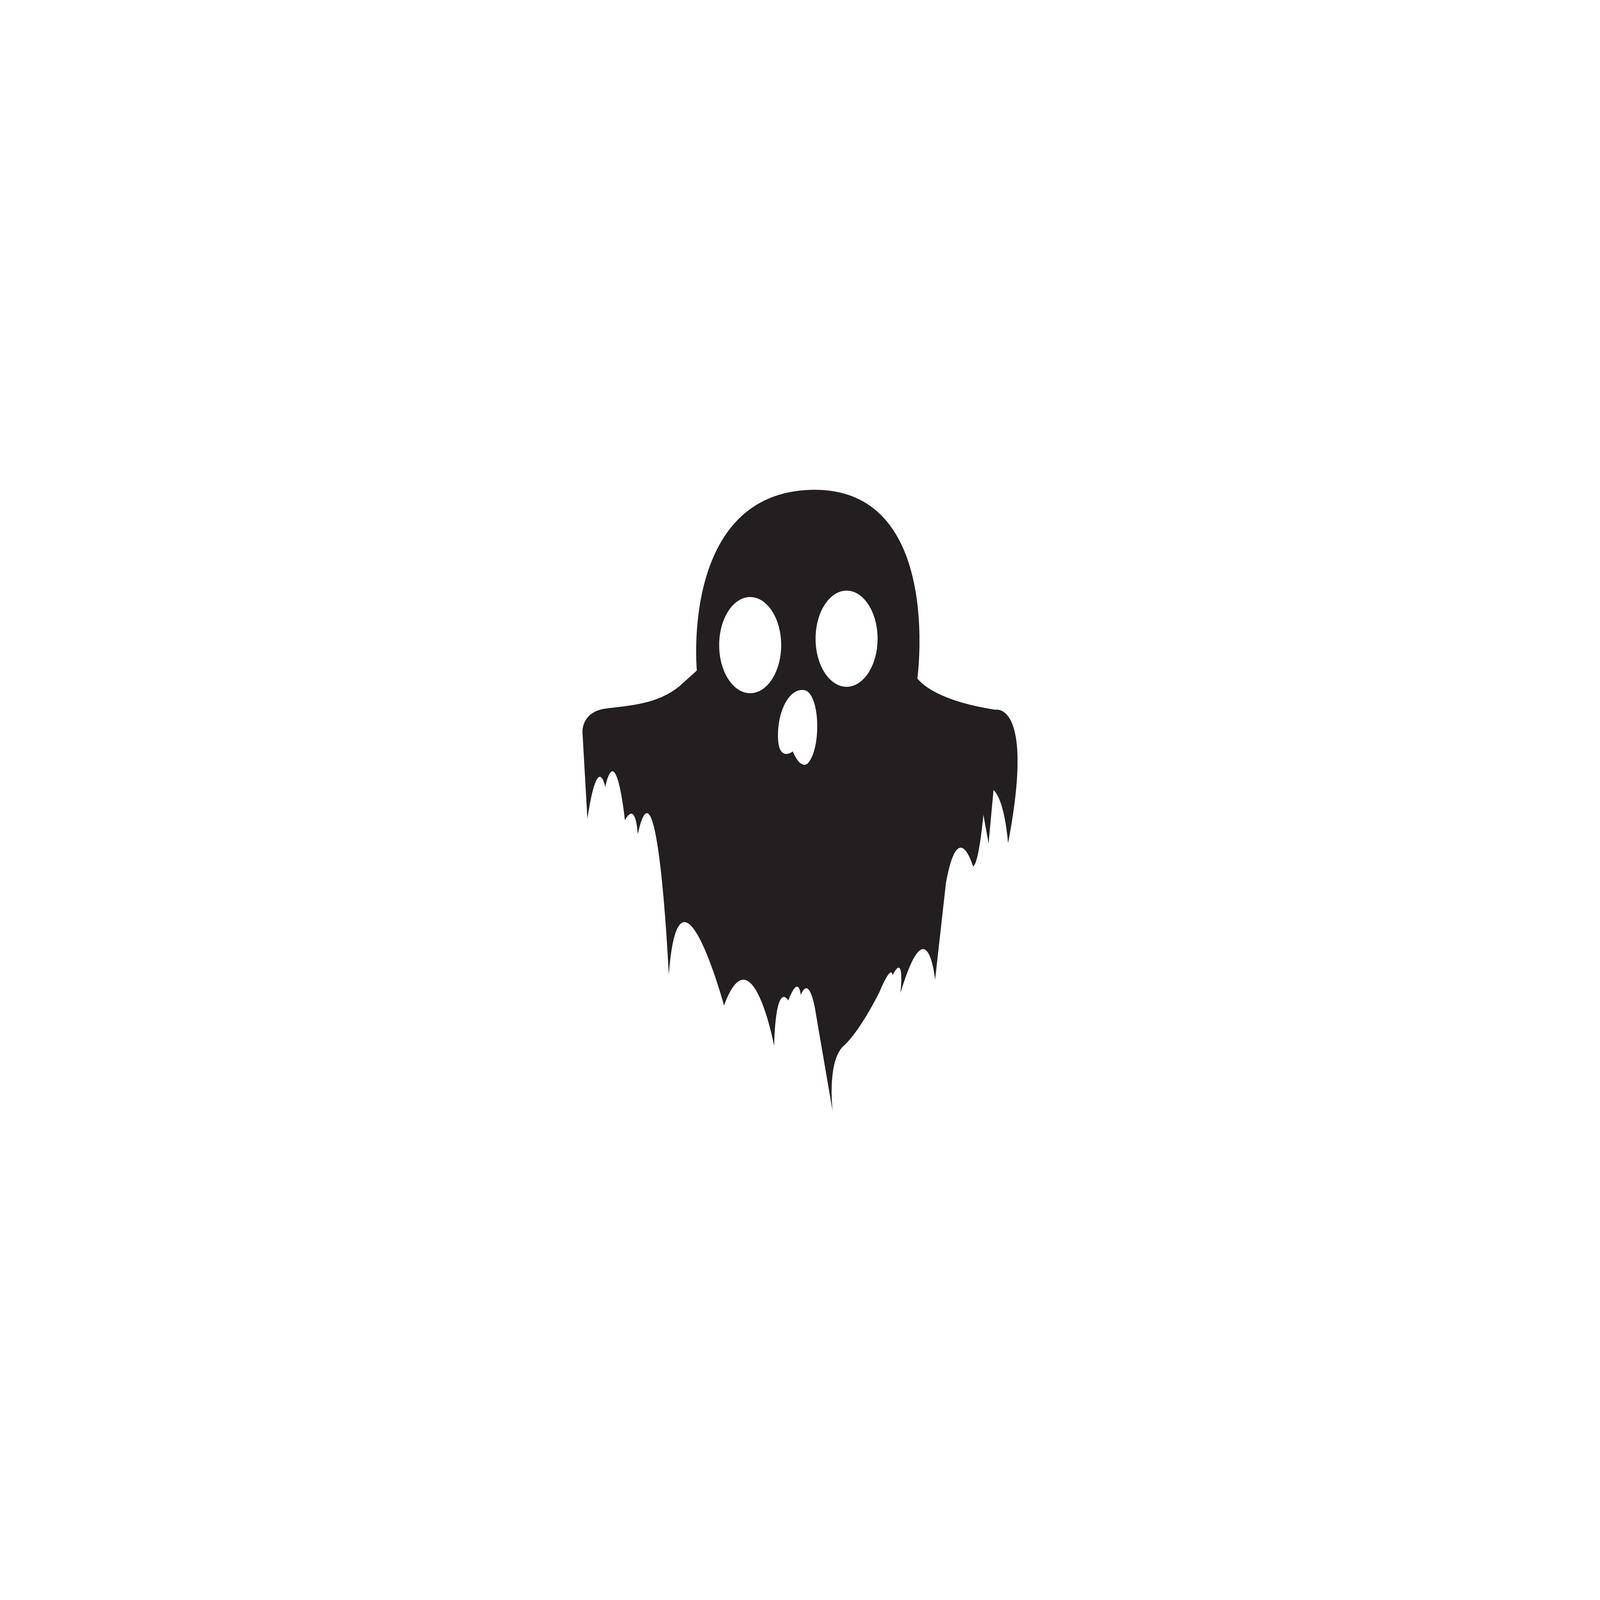 Ghost icon vector illustration logo design,isolated on white background.